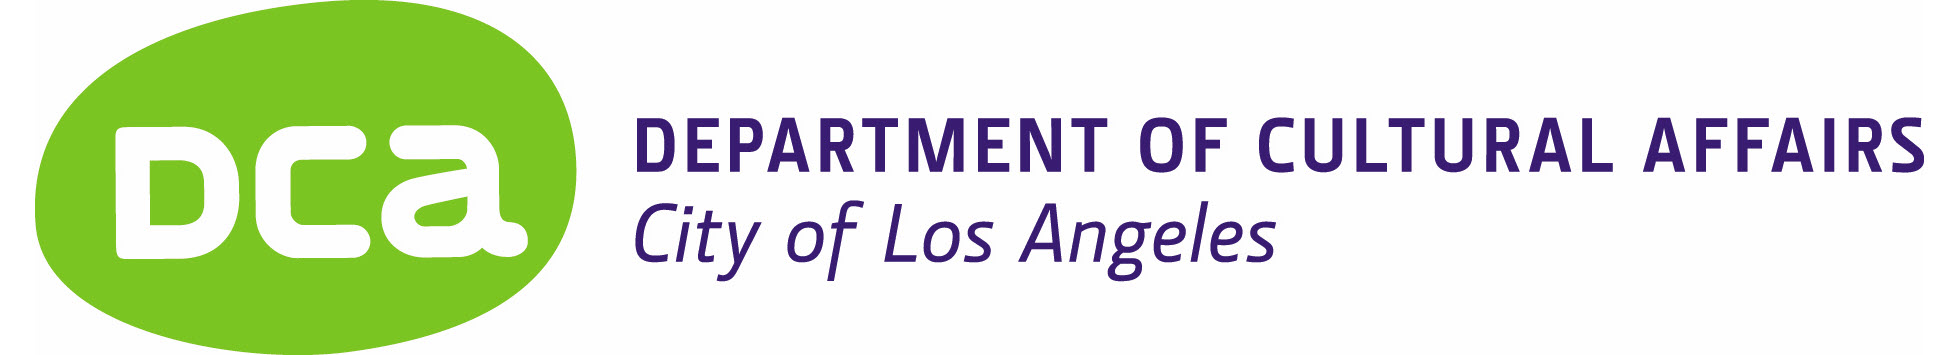 Logo of City of Los Angeles Department of Cultural Affairs.